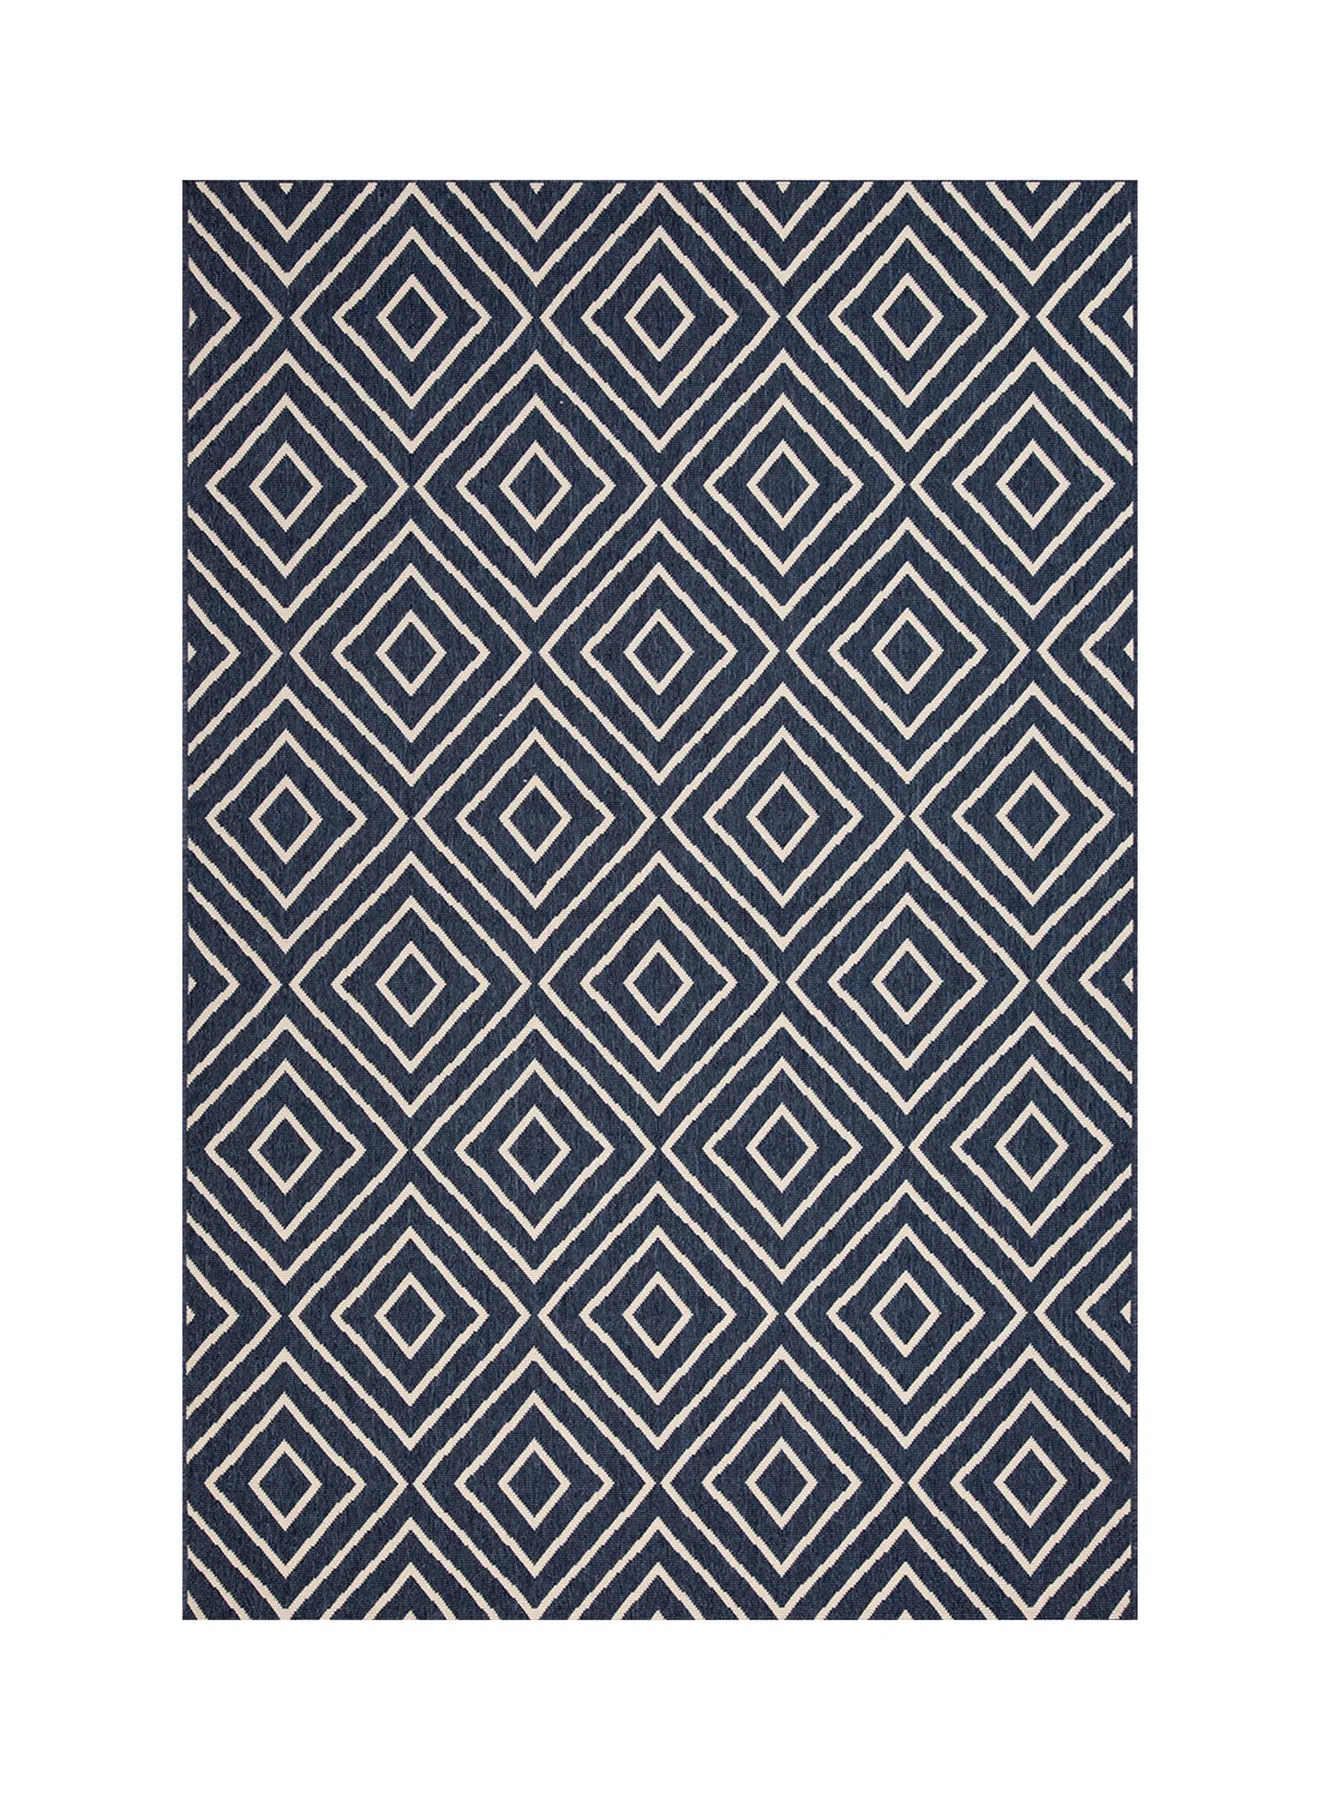 ebb & flow L. Tributary Outdoor Unique Luxury Quality Material Carpet For The Perfect Stylish Home 1053B Blue/White 120 x 170cm